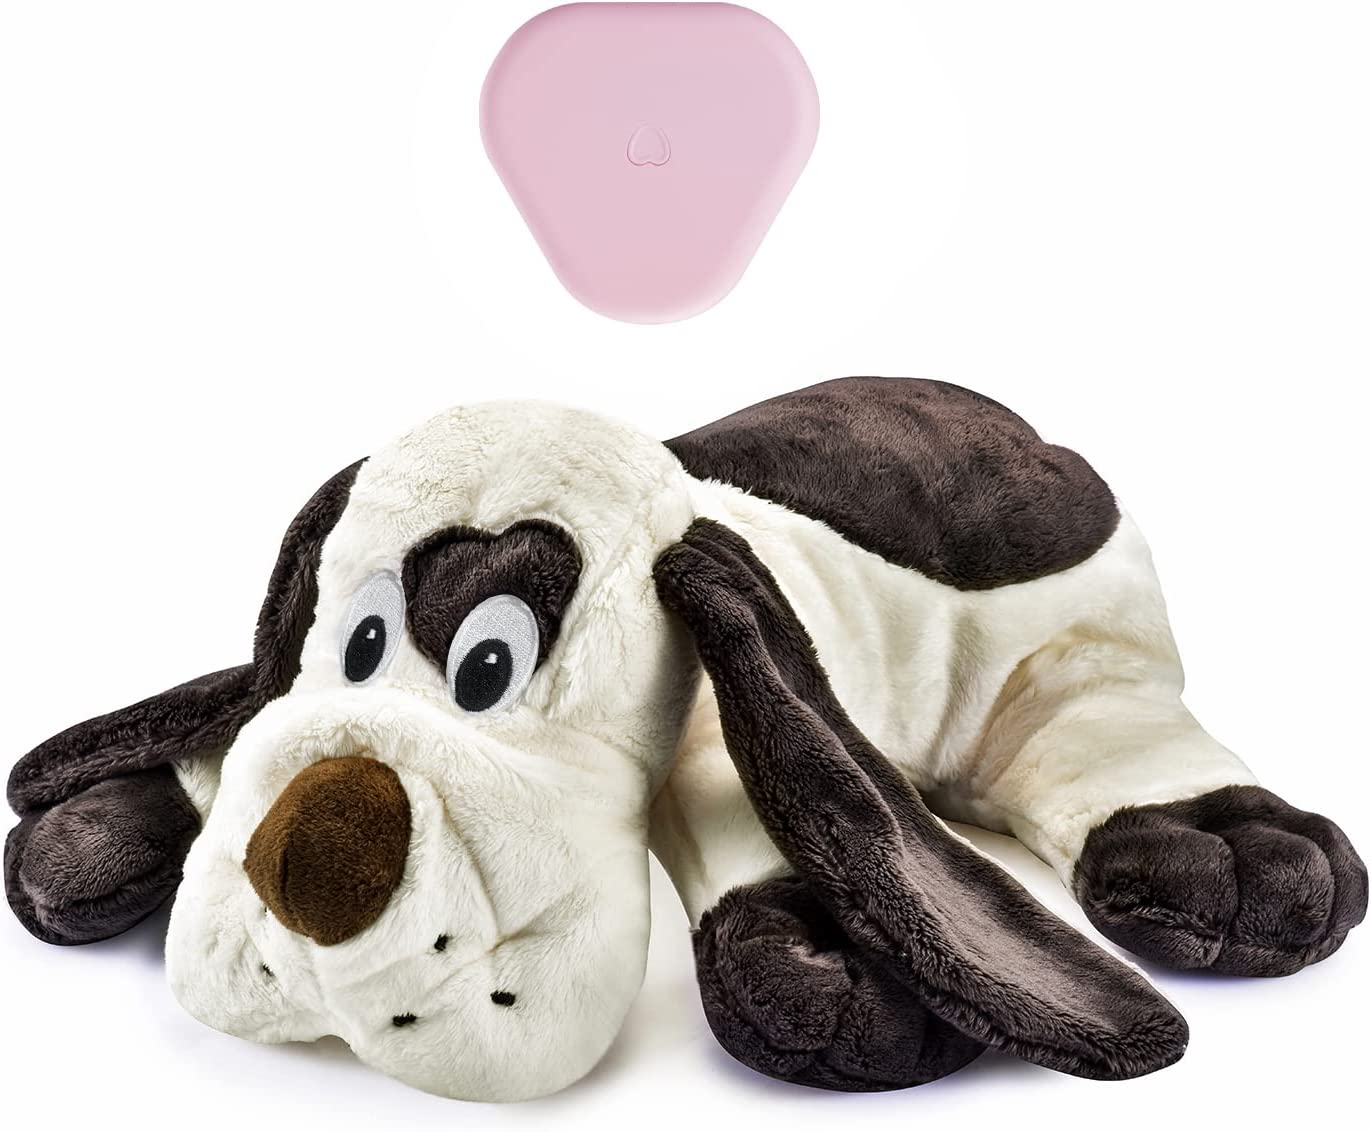 9. Moropaky Puppy Heartbeat Toy for Separation Anxiety